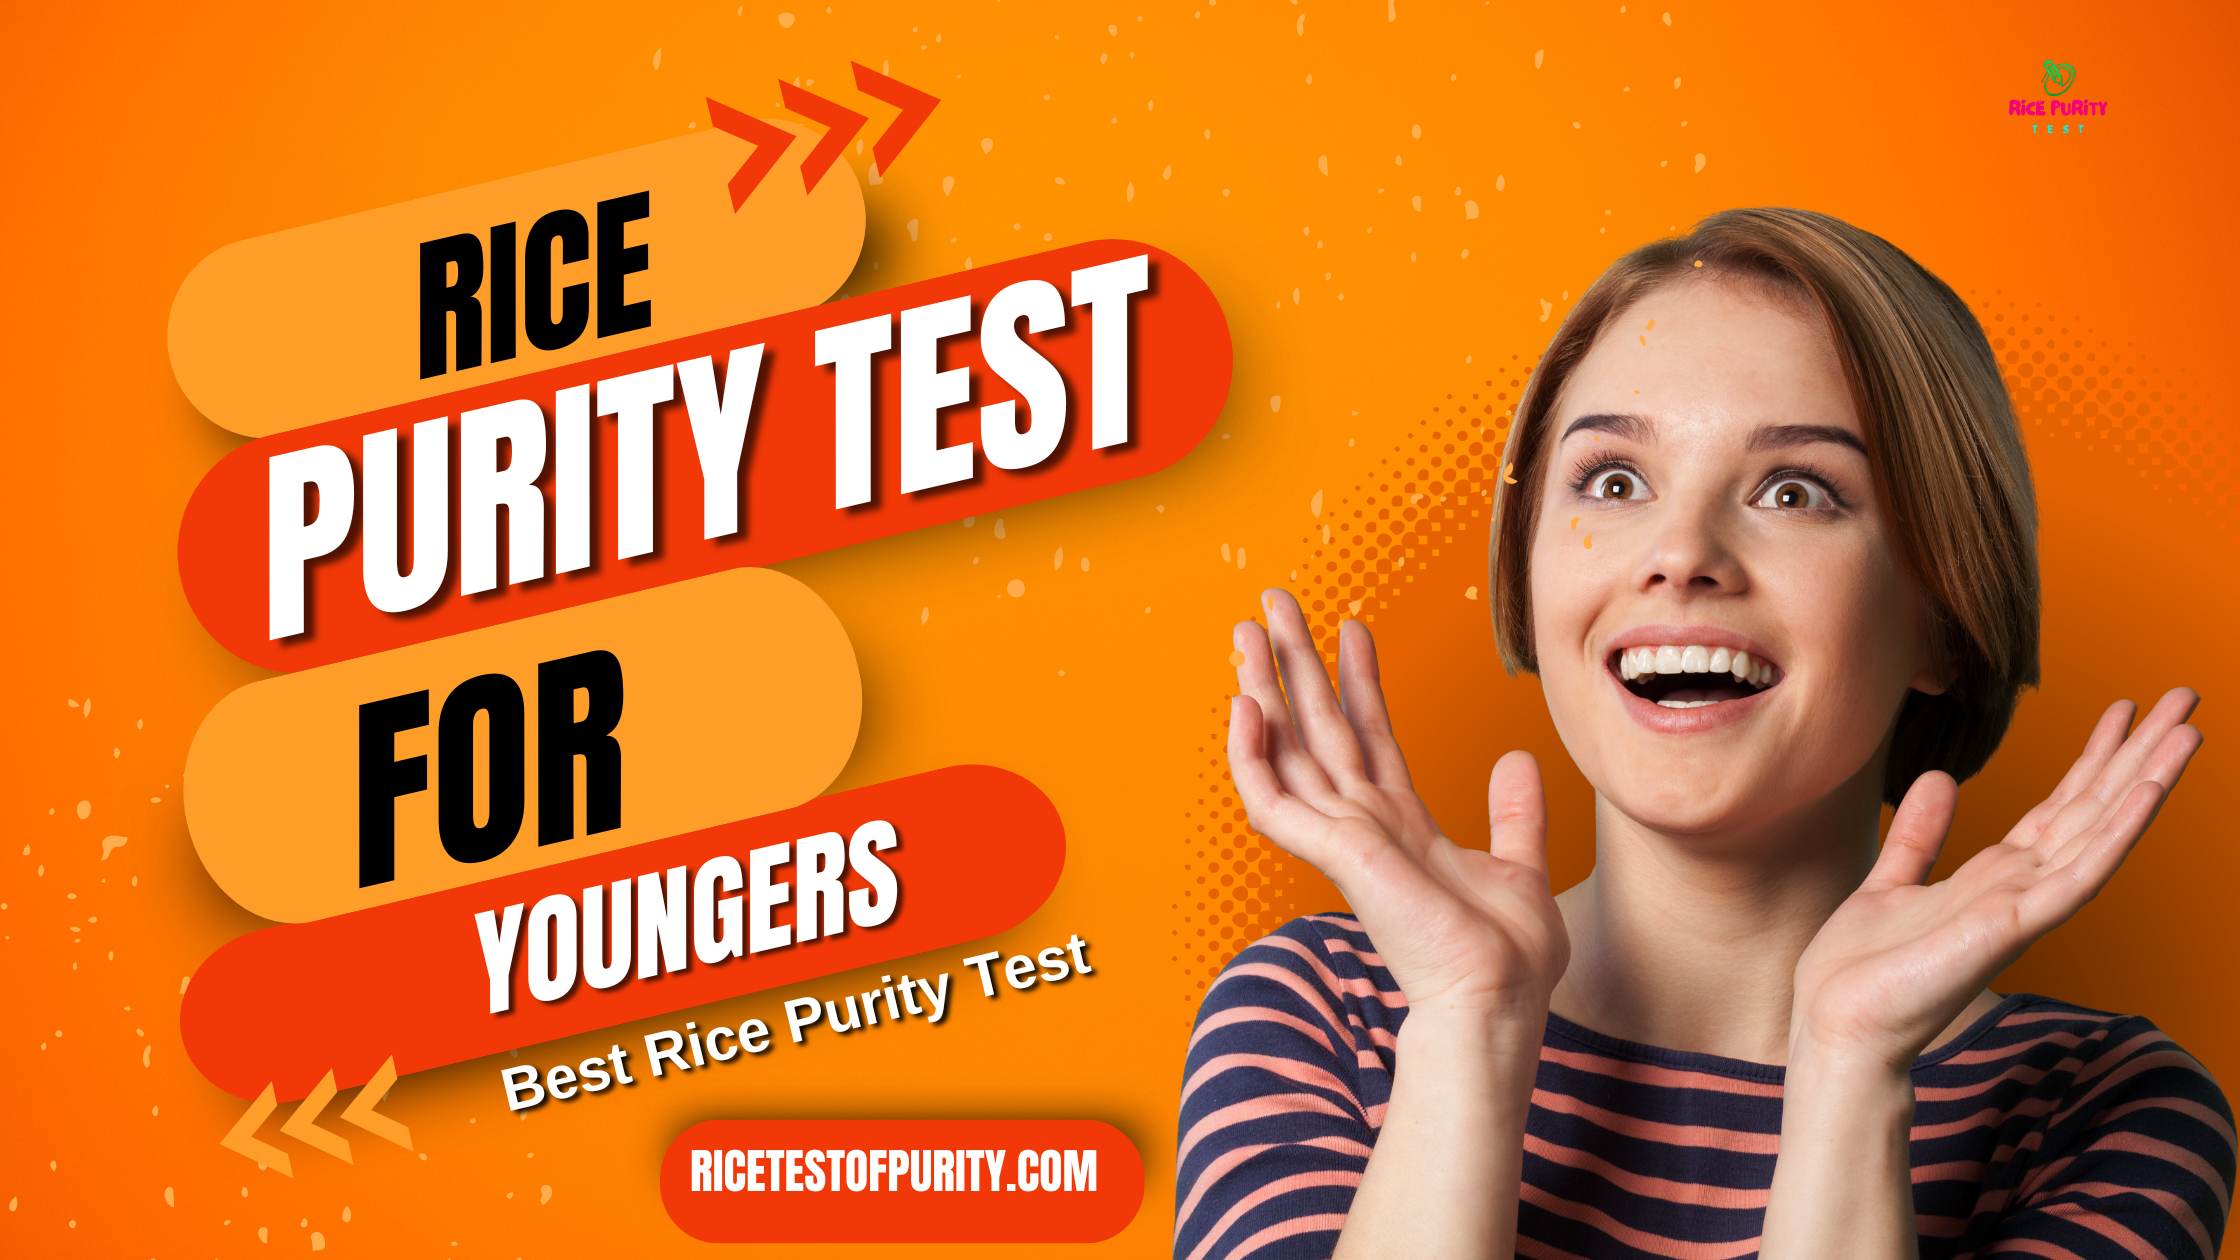 Rice Purity Test for Youngers